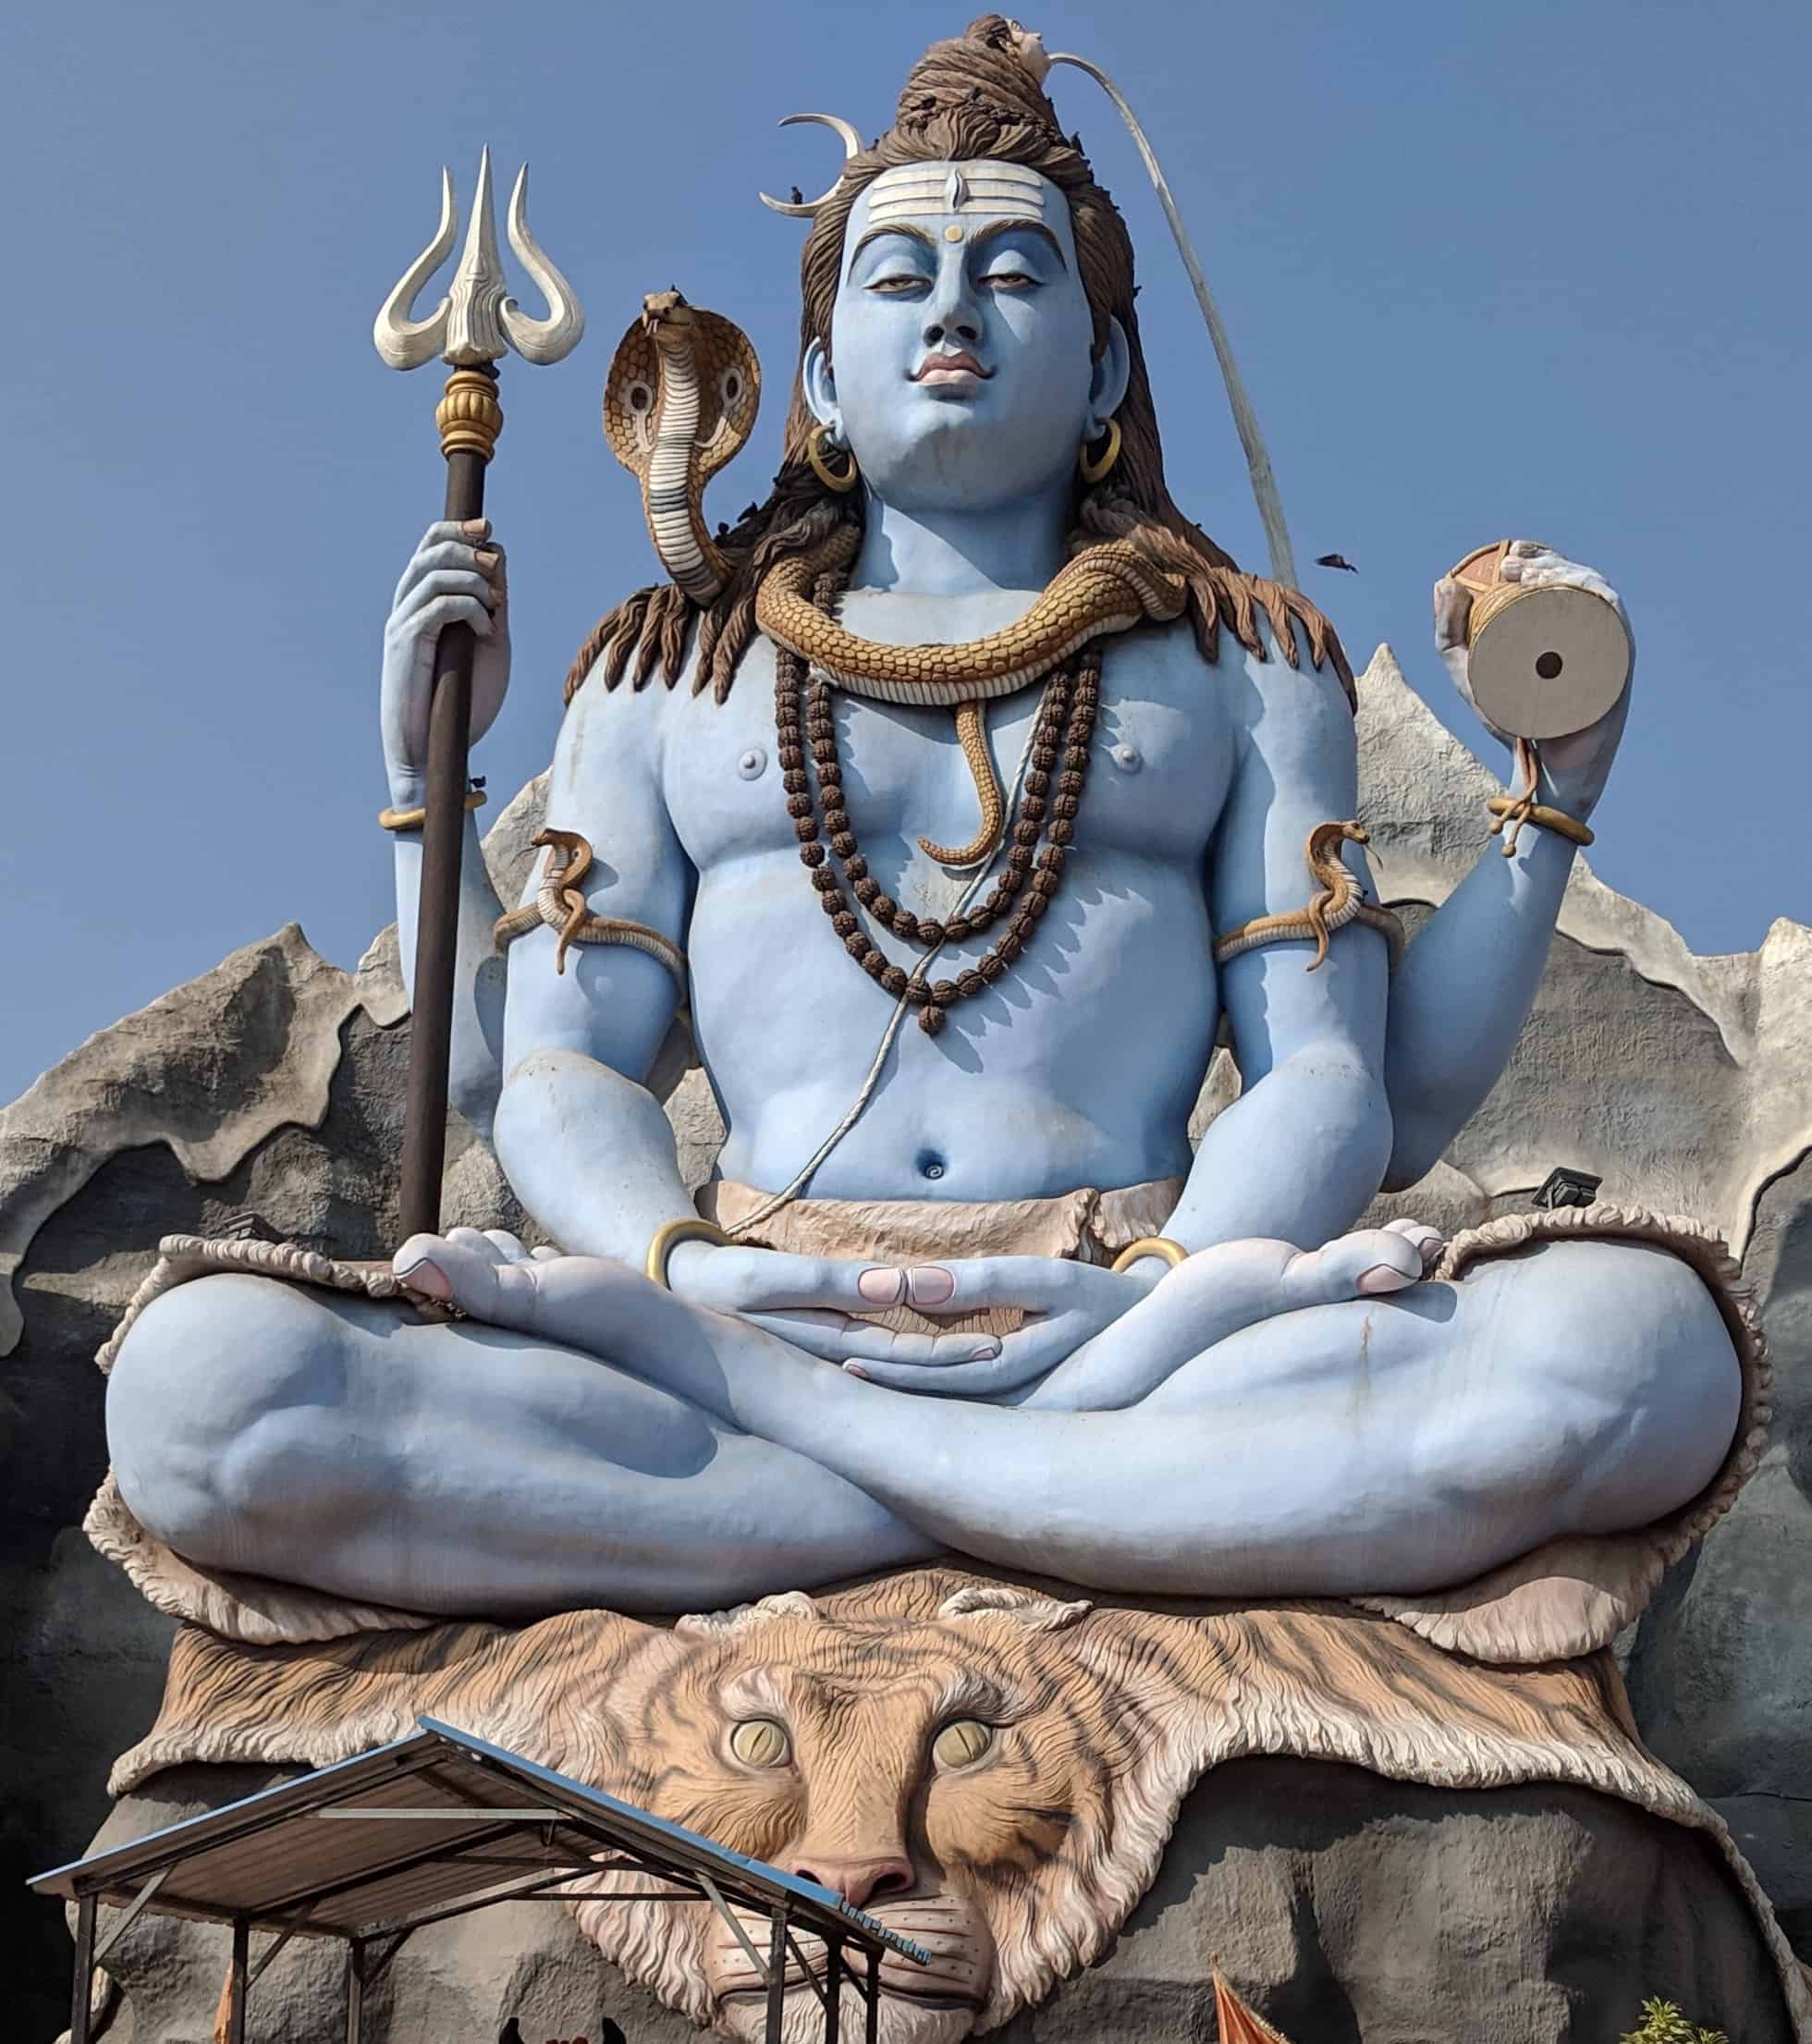 Who is the Mother and Father of Lord Shiva?